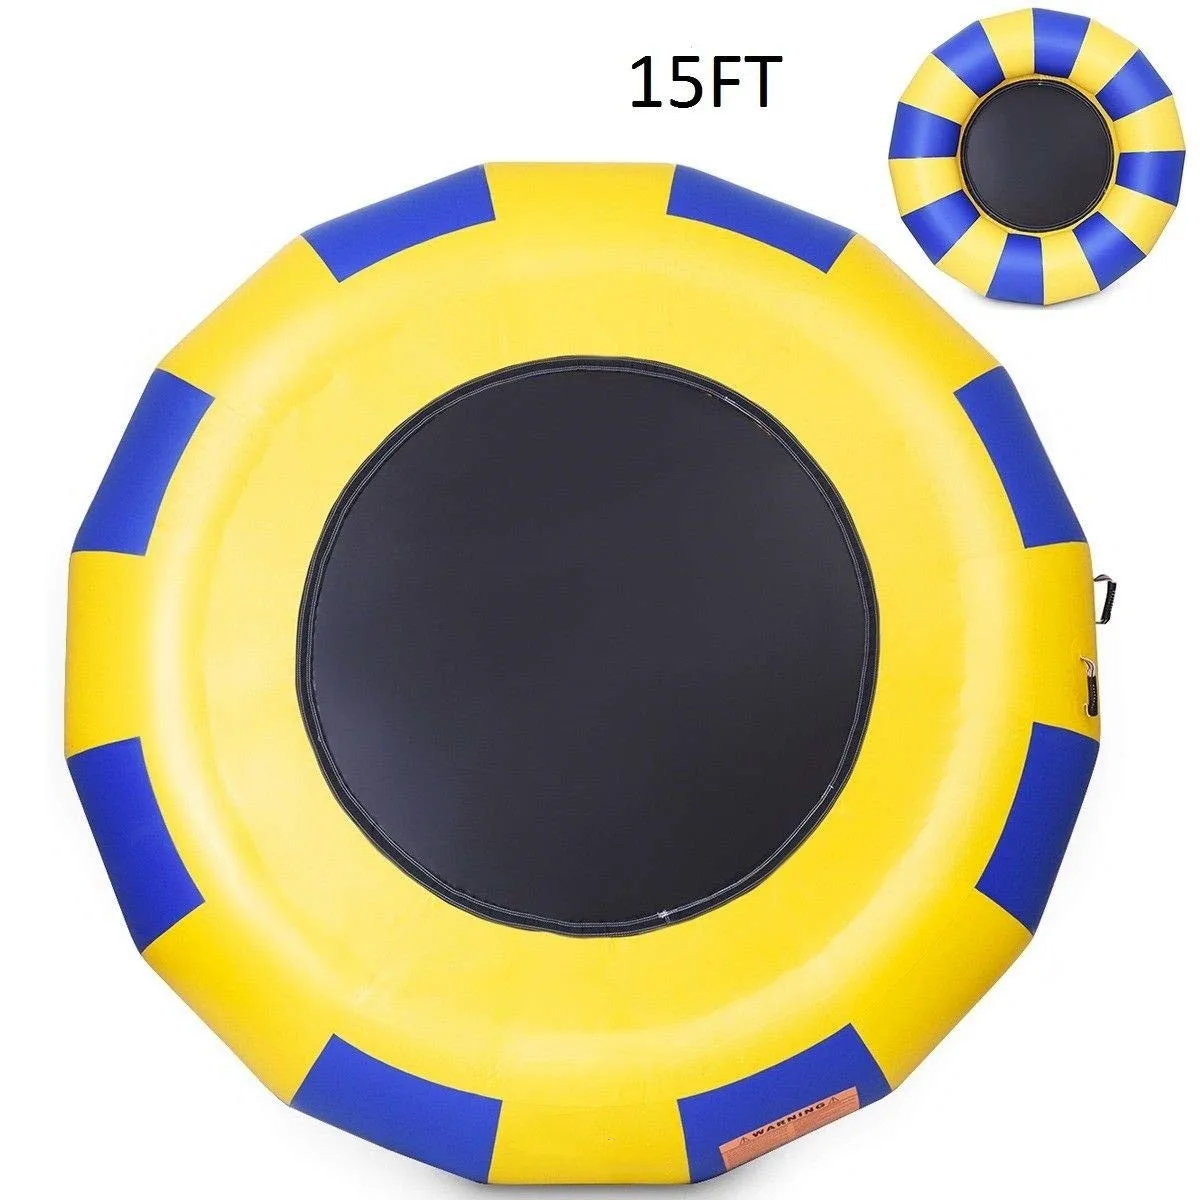 Floating  platforms inflatable water trampoline for waterpark equipment